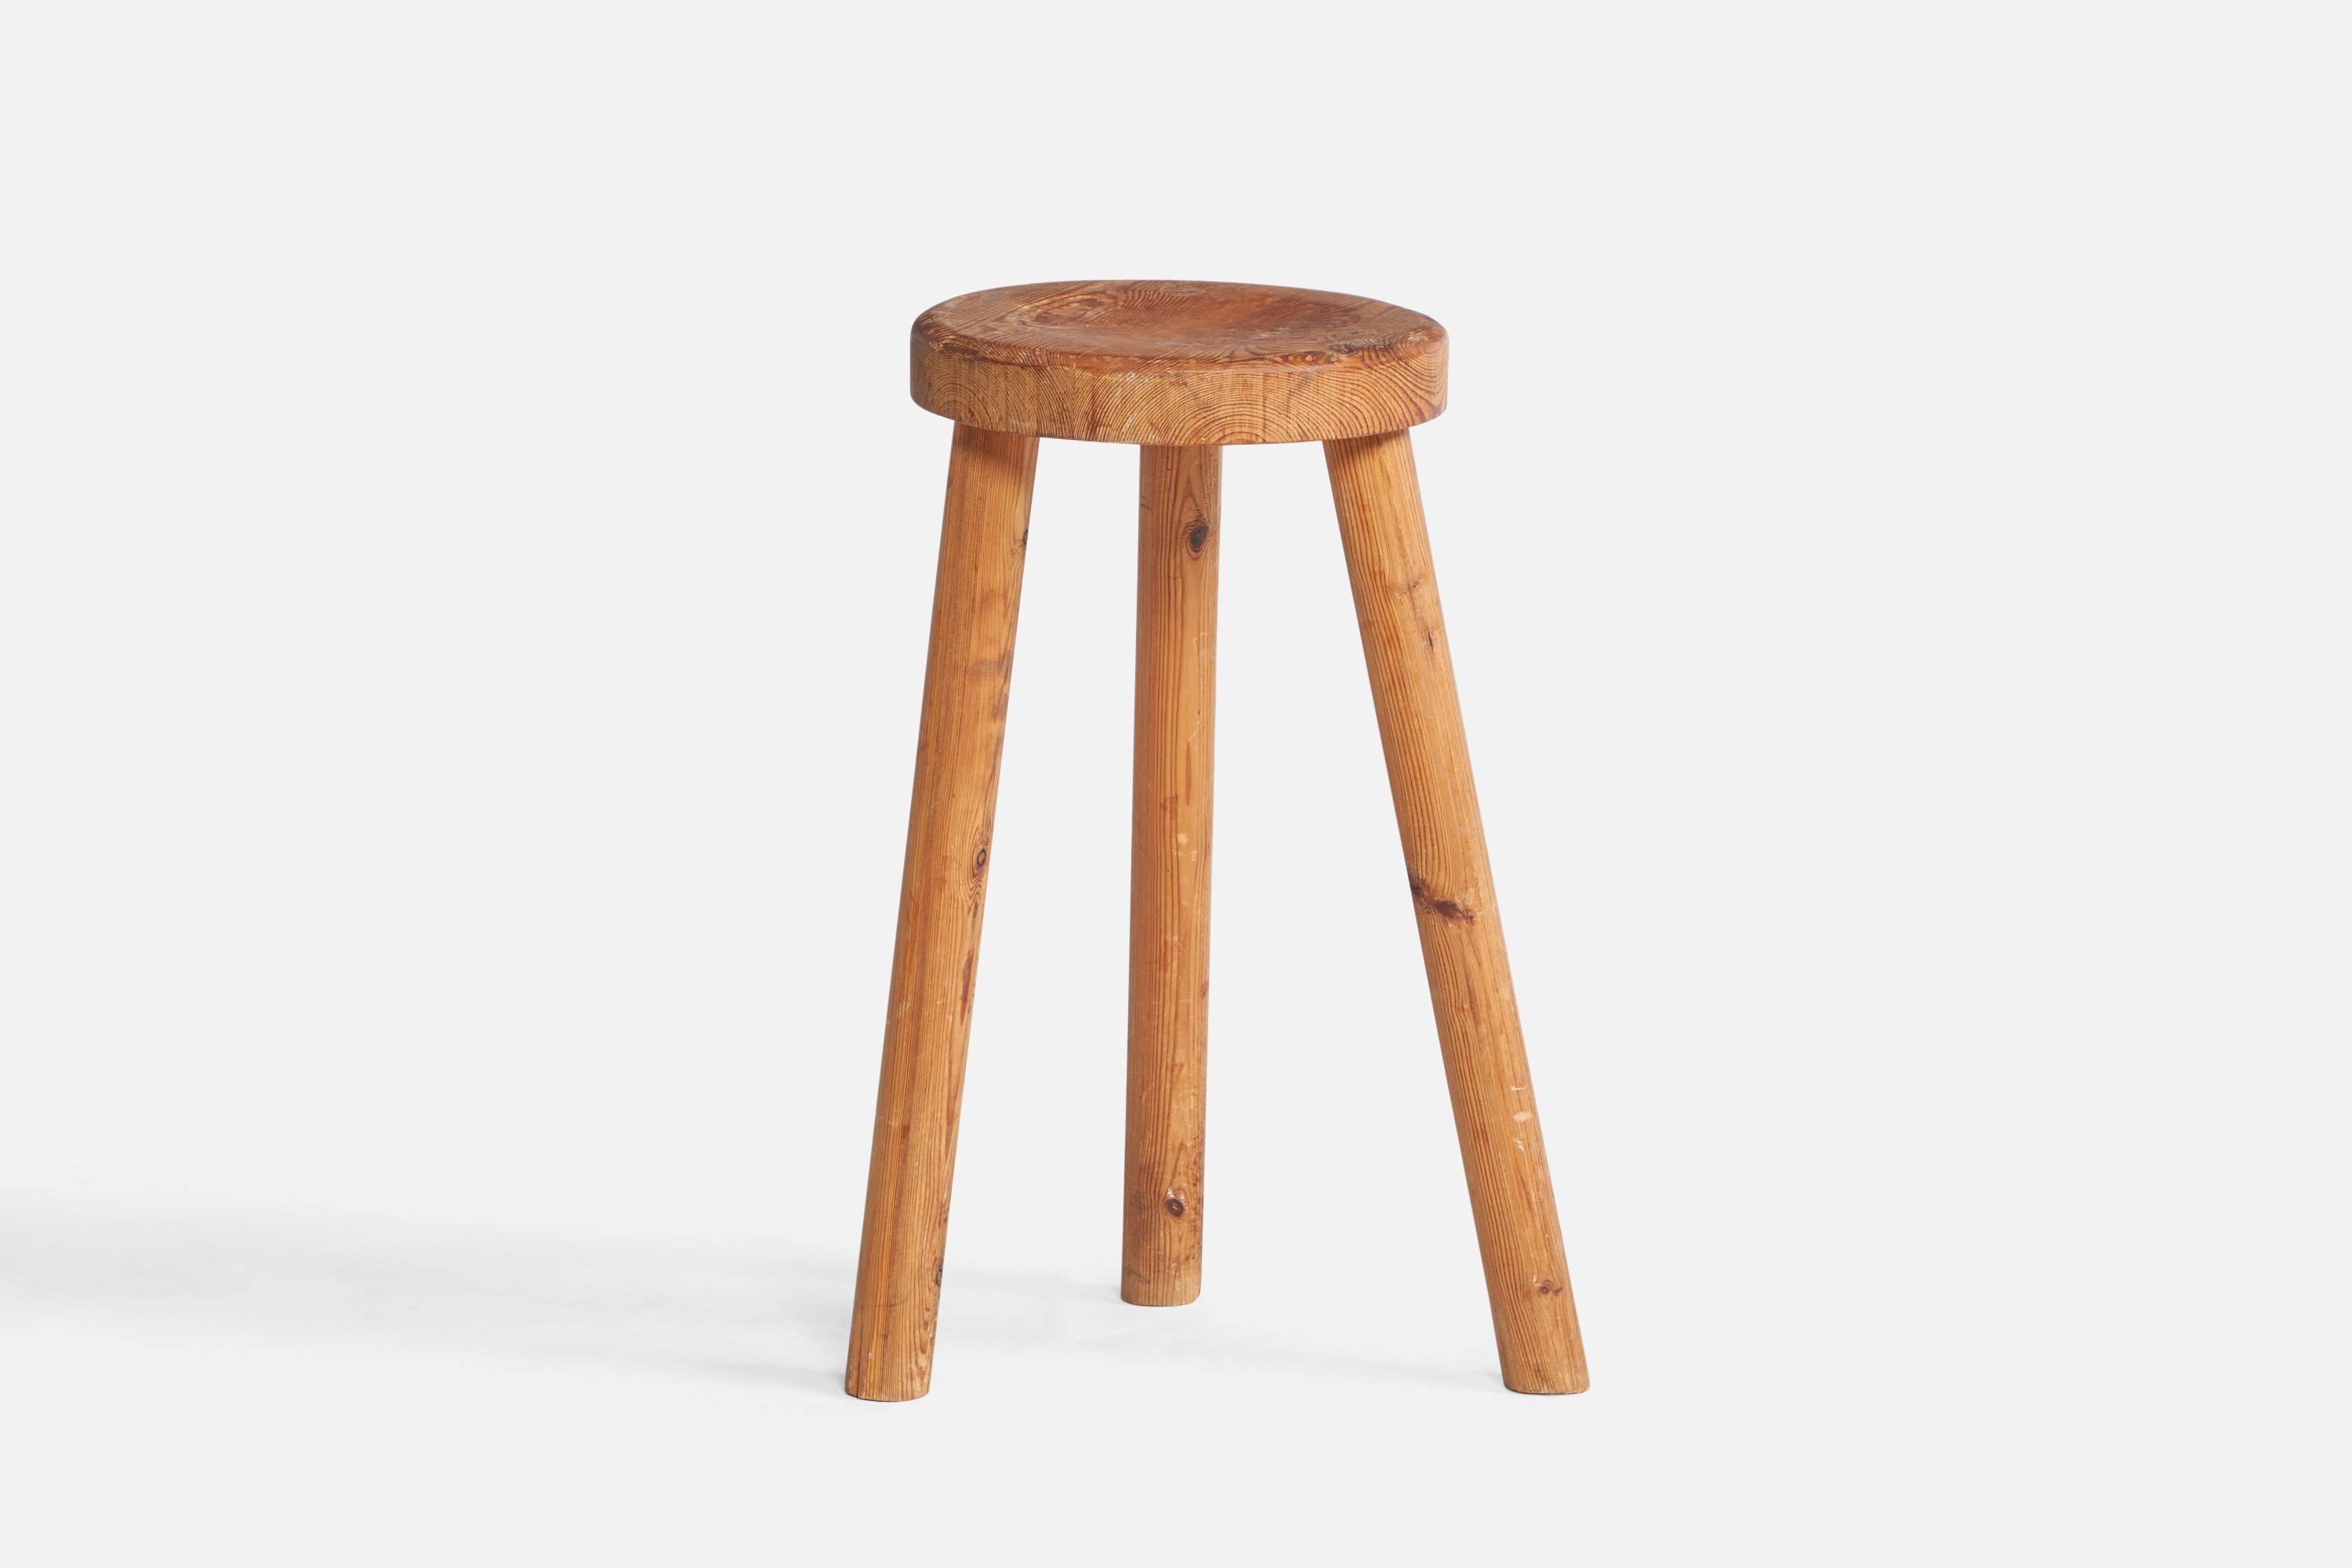 A pine stool designed and produced in Sweden, 1940s.